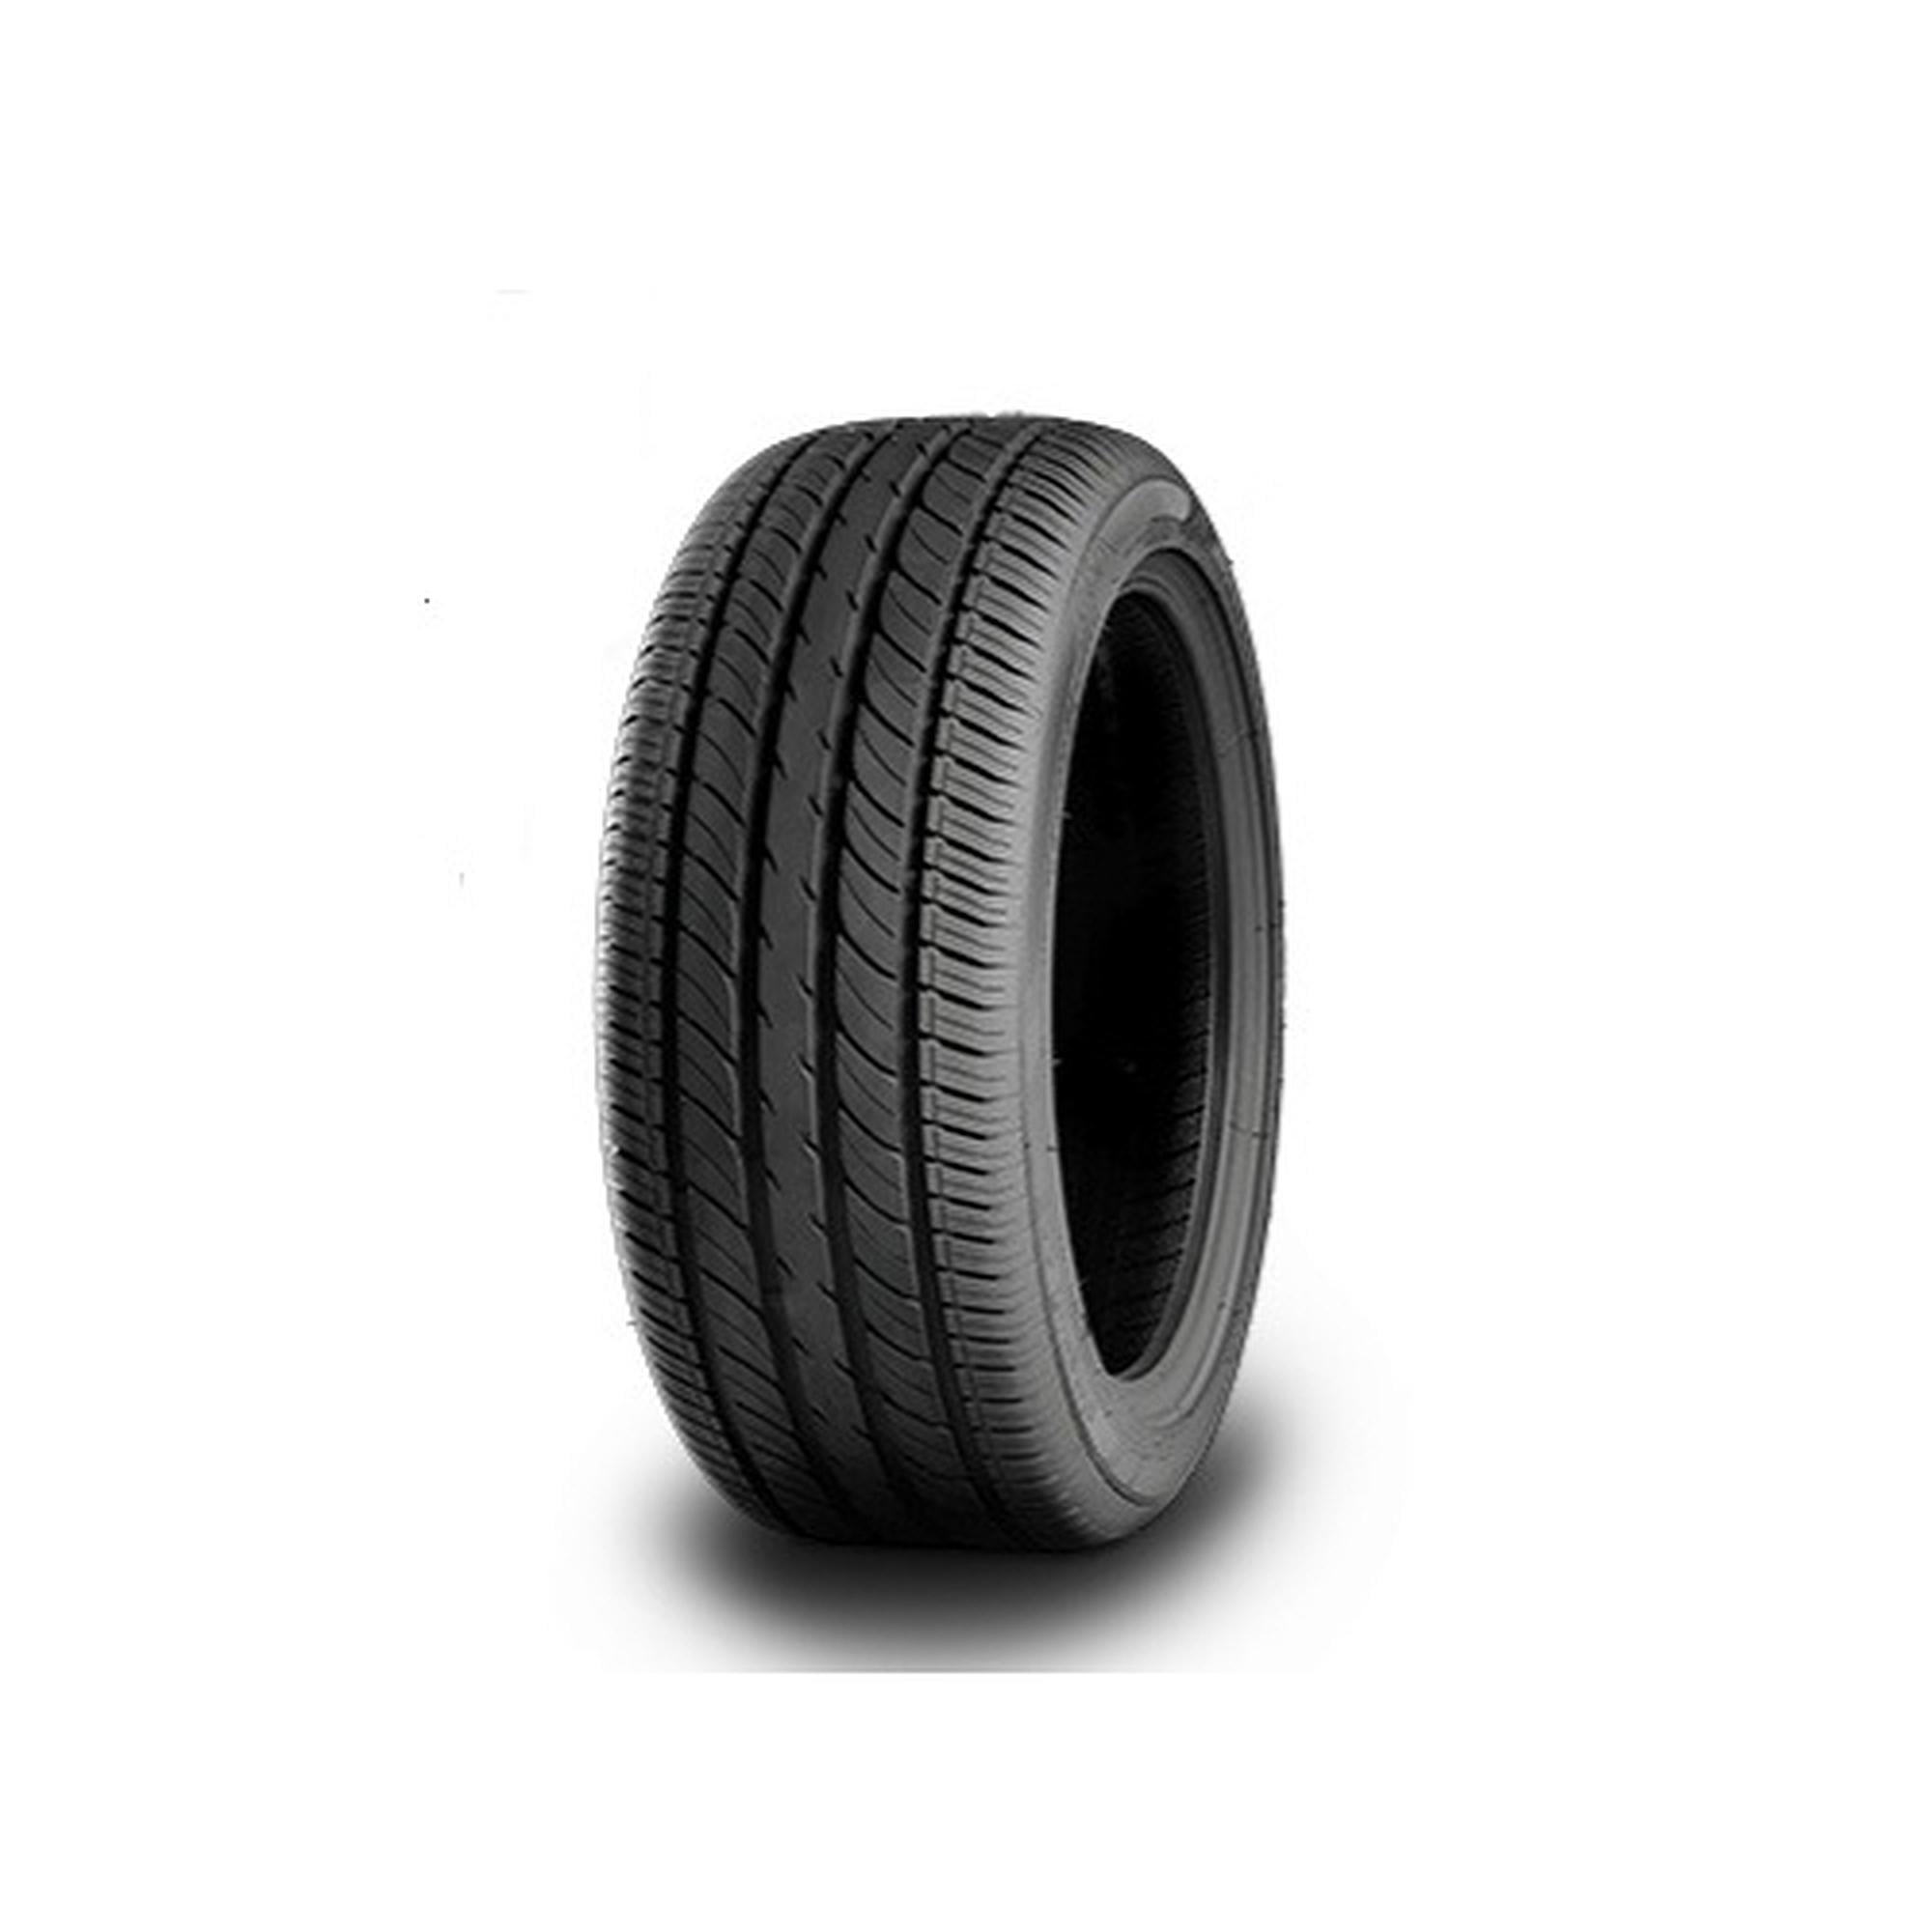 Passenger Eco 165/70R13 79T Tire Summer Waterfall Dynamic